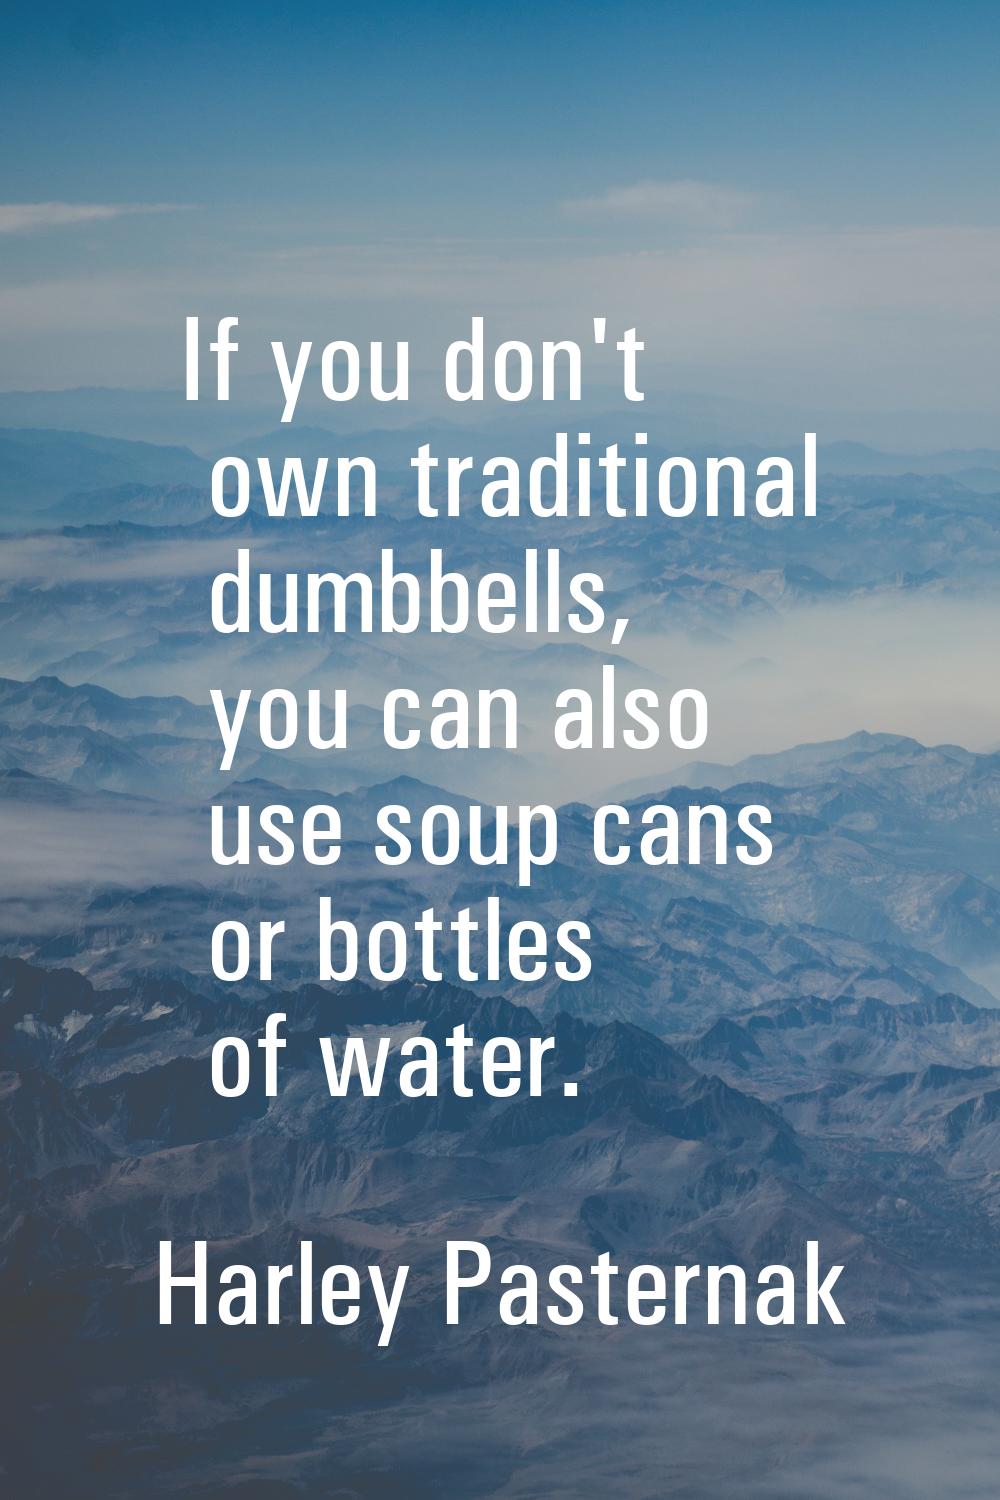 If you don't own traditional dumbbells, you can also use soup cans or bottles of water.